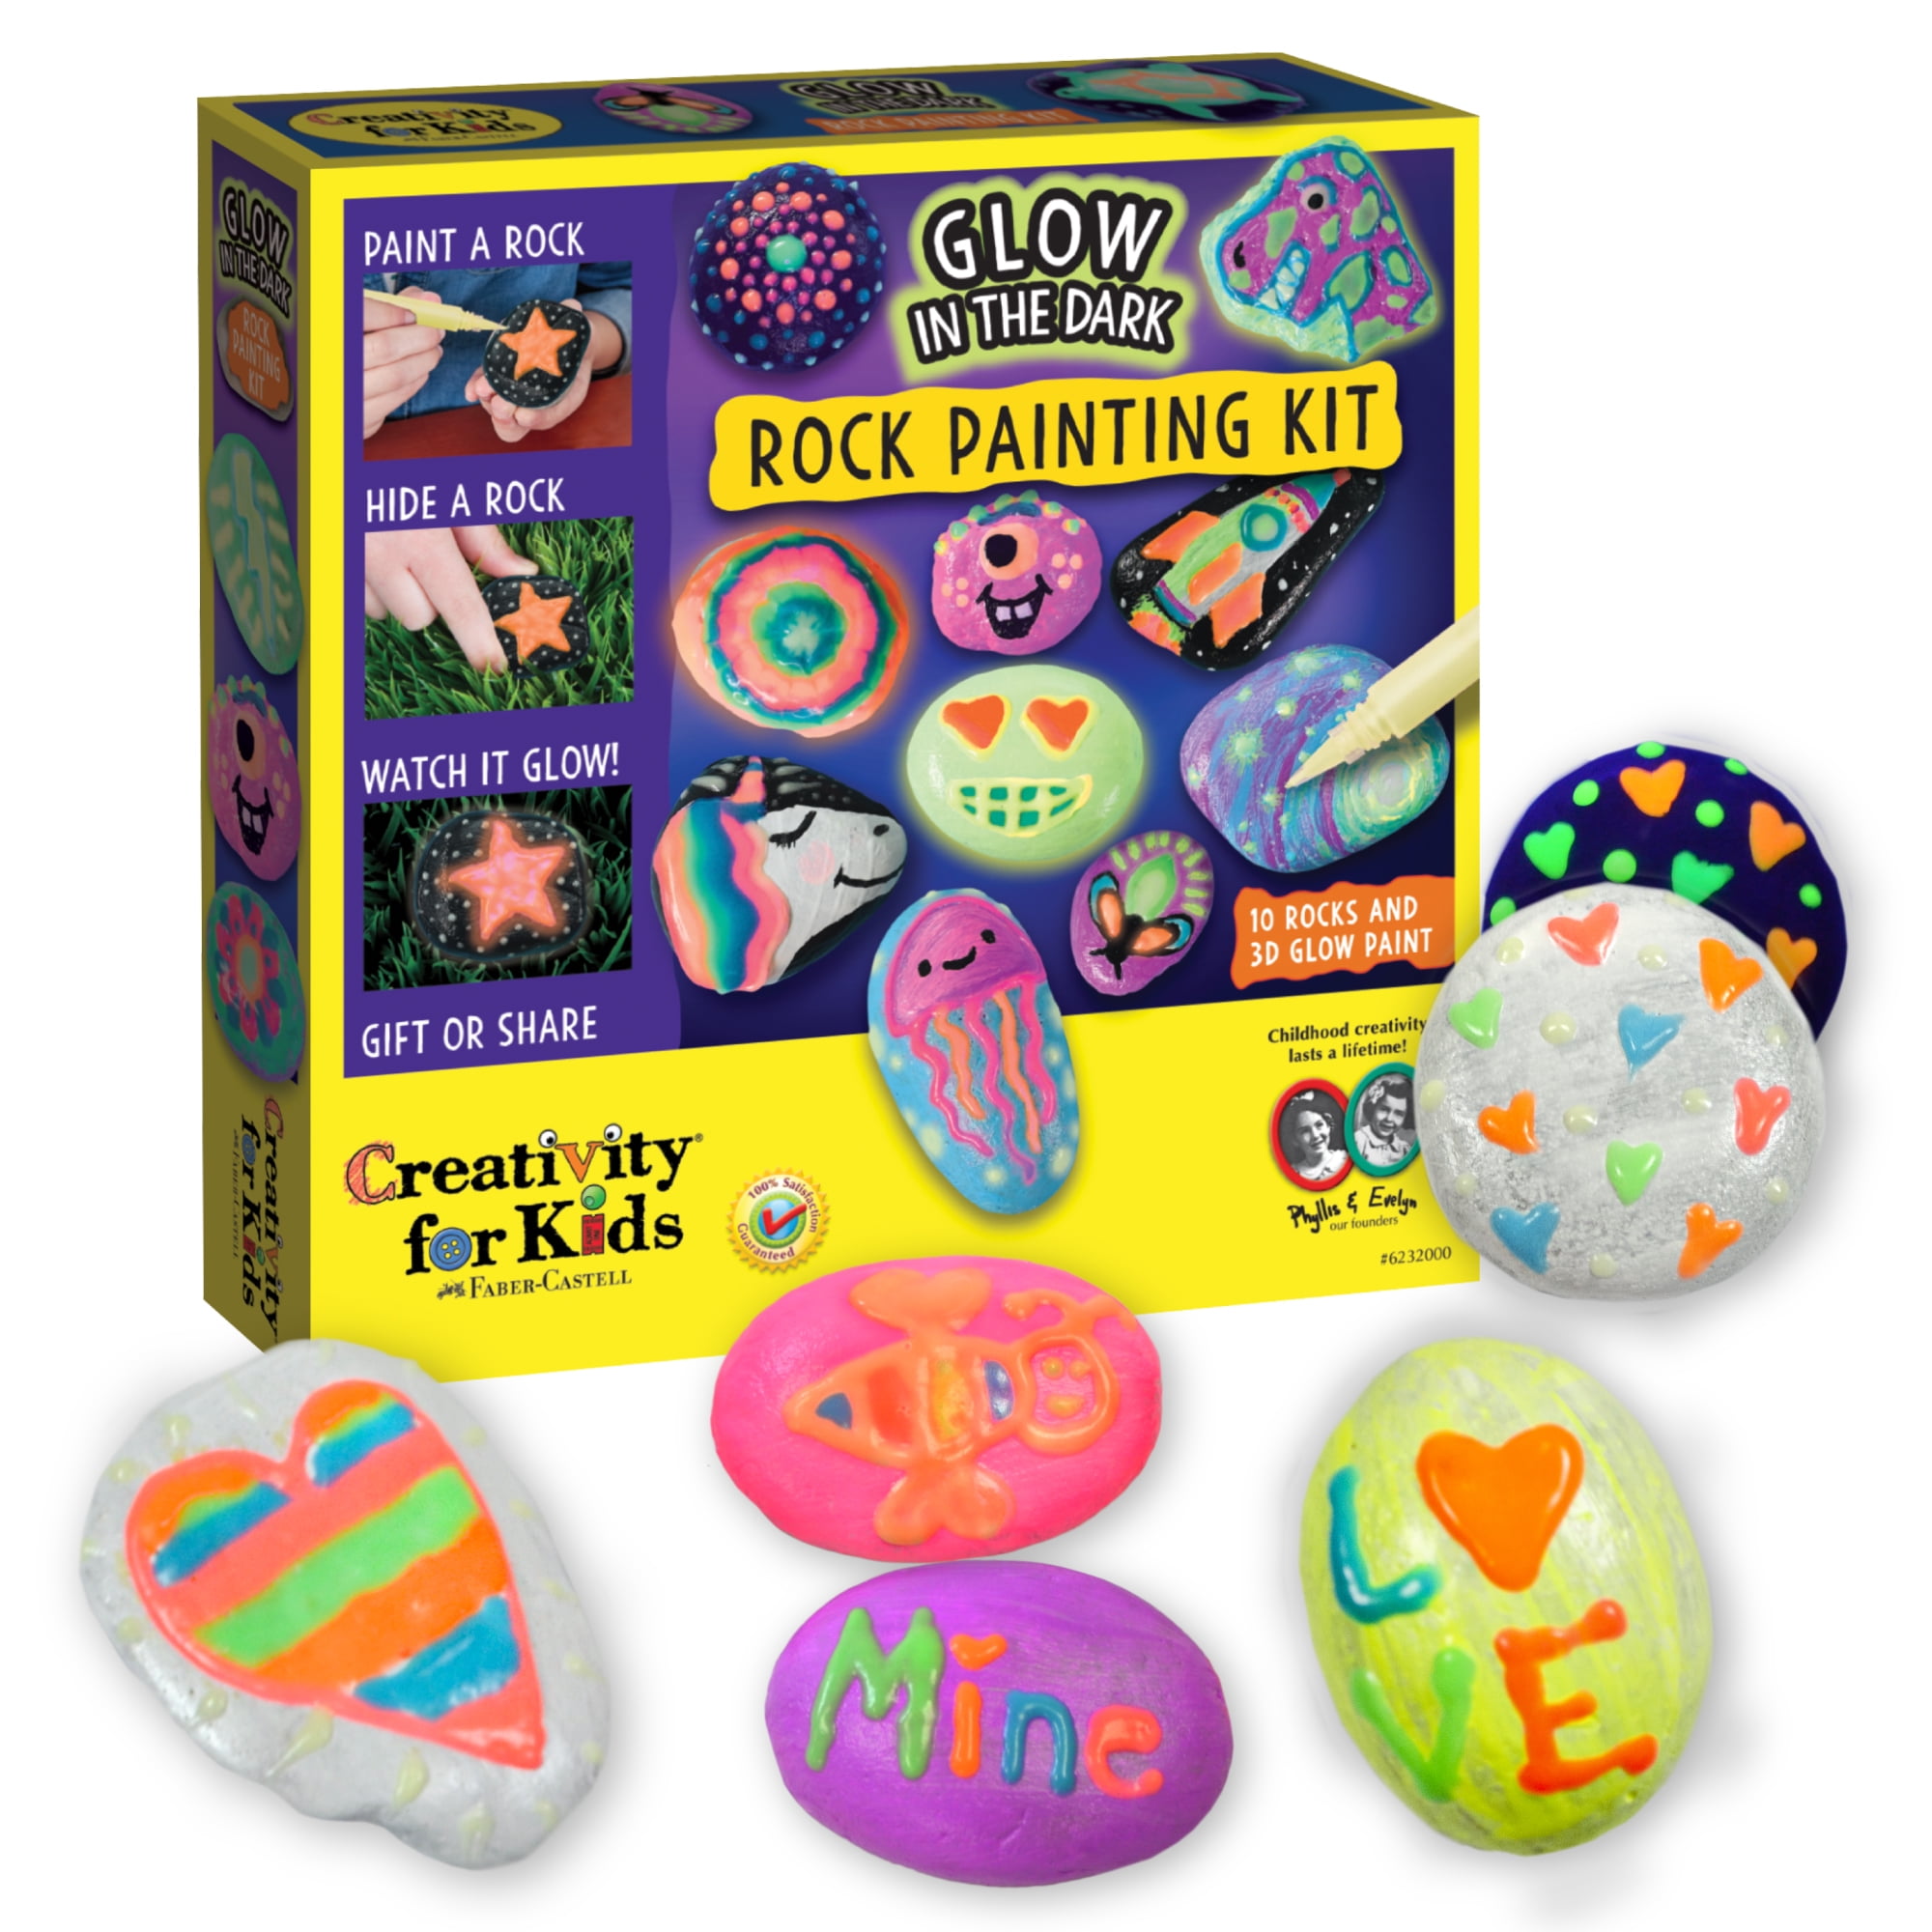 Hide & Seek Rock Painting - Creativity for Kids – The Red Balloon Toy Store